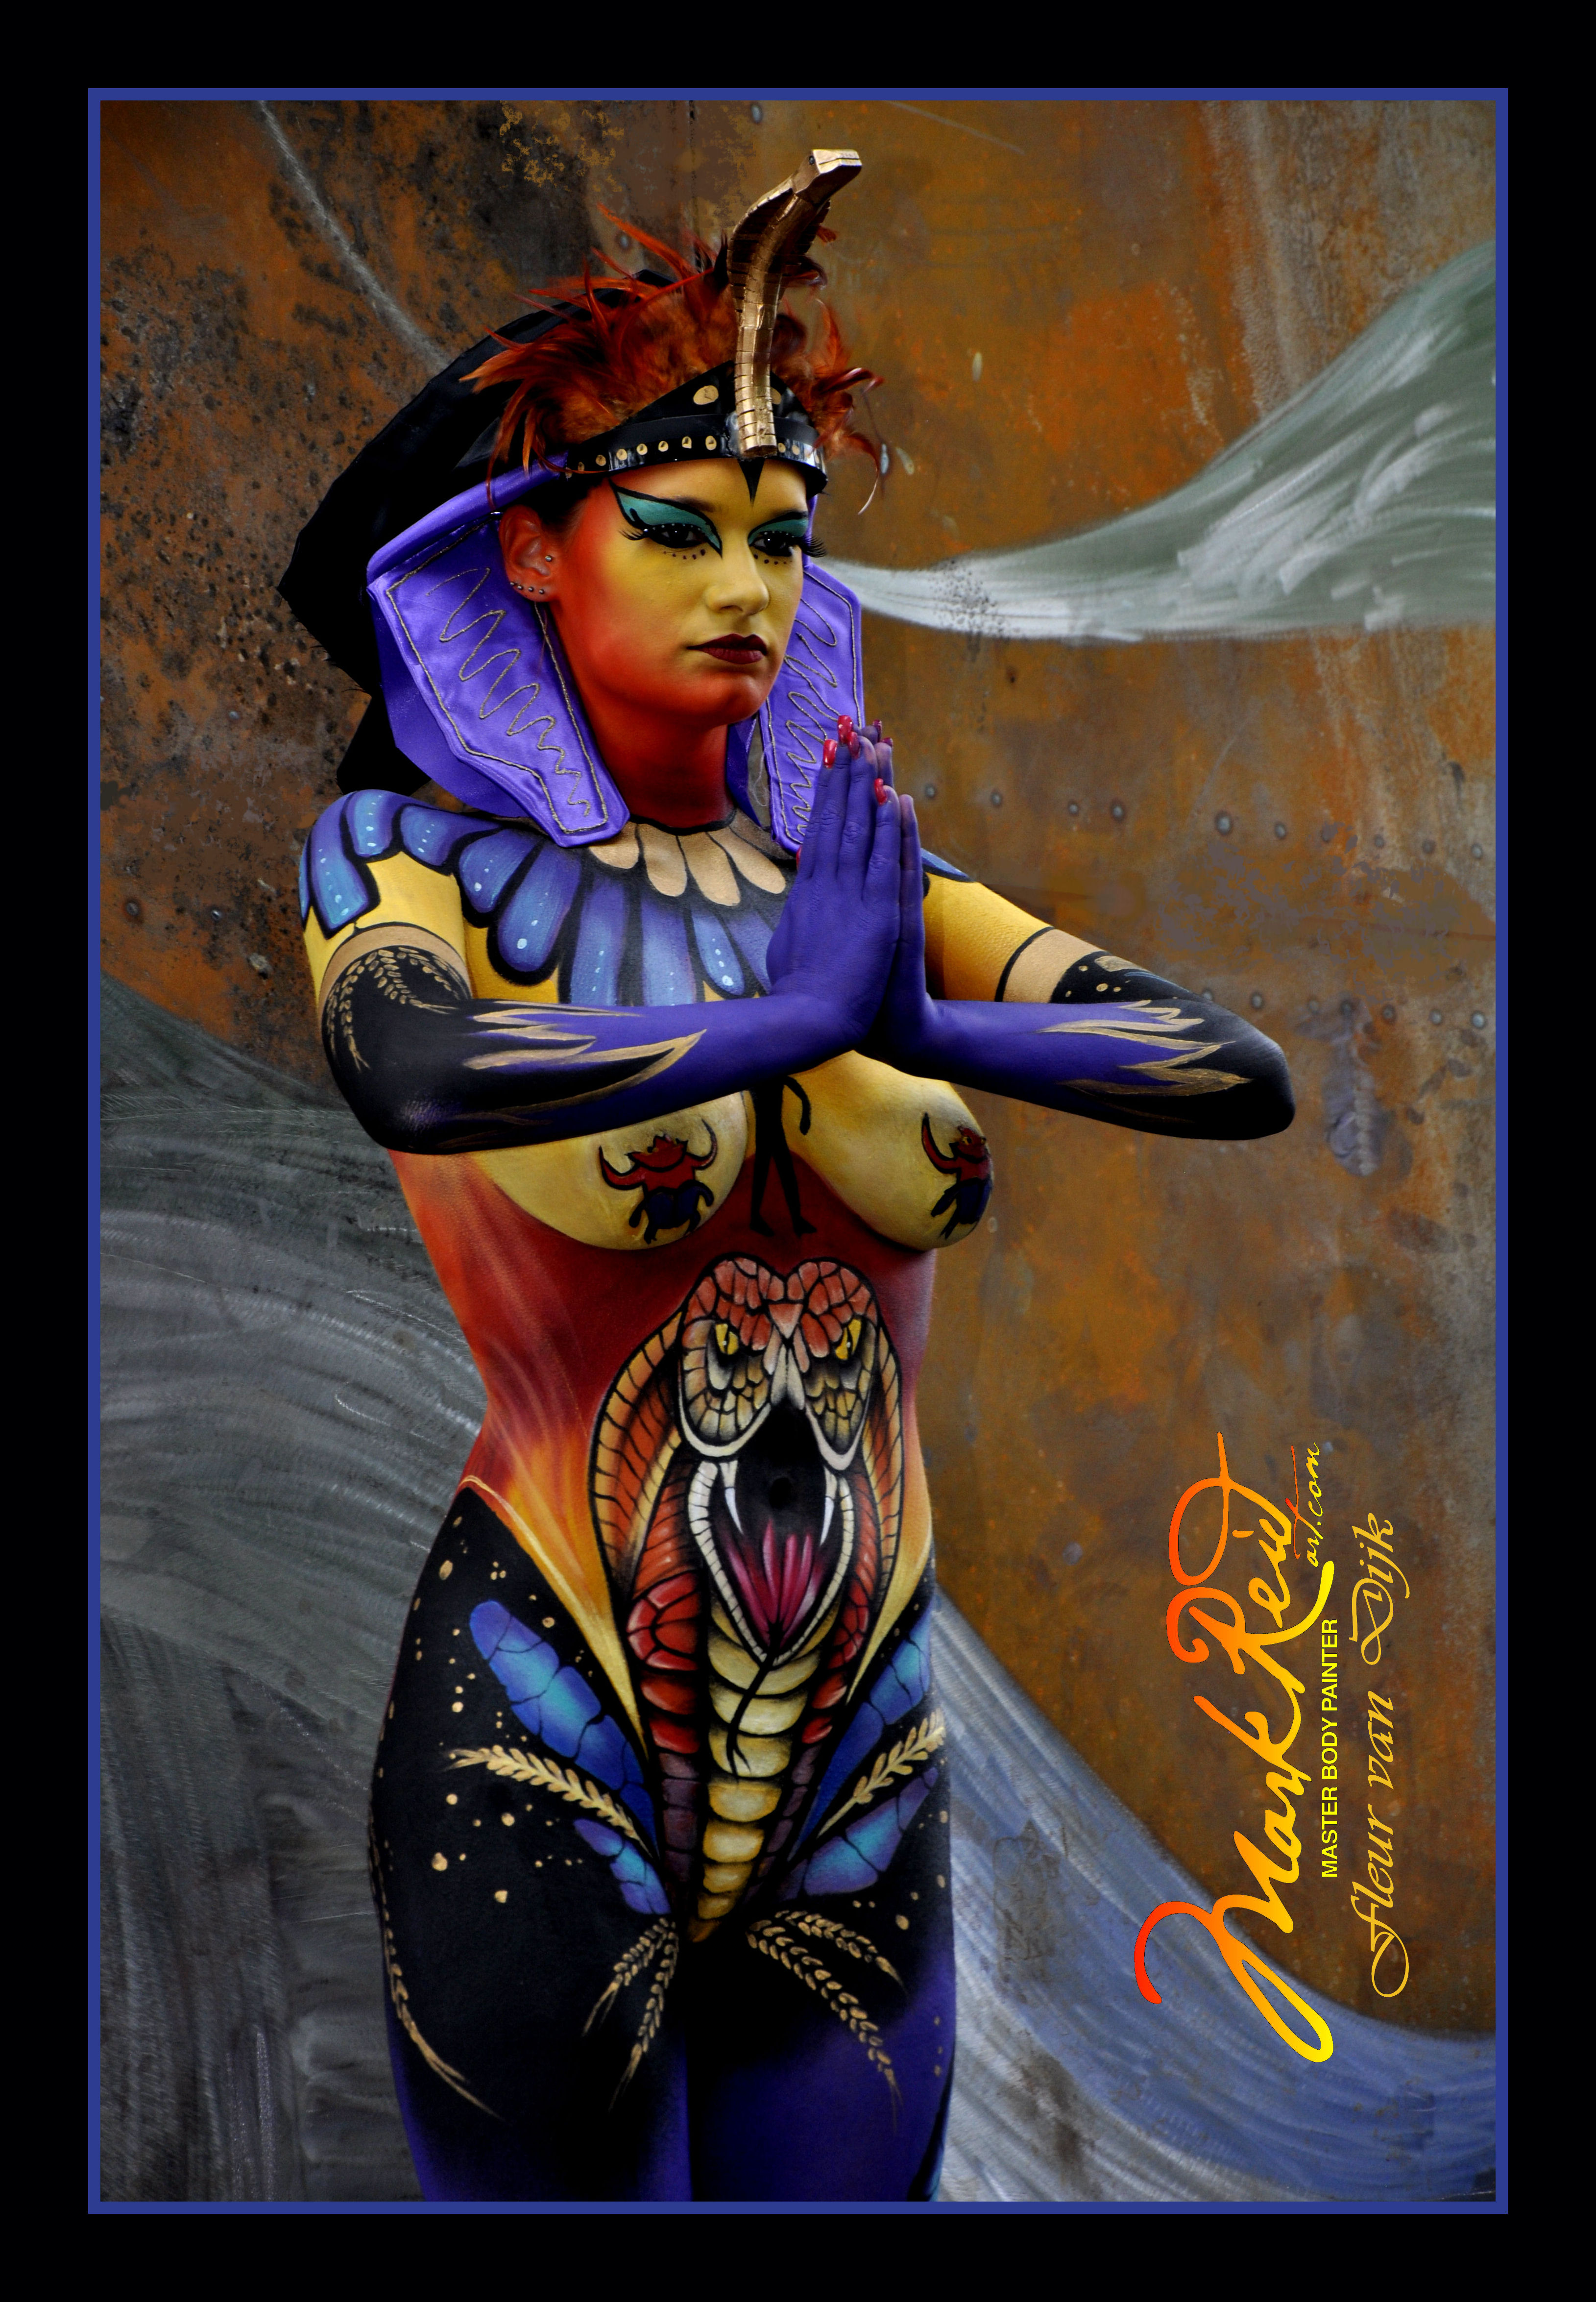 Very colorful full body painting on a woman in an ancient Egyptian style including a headdress